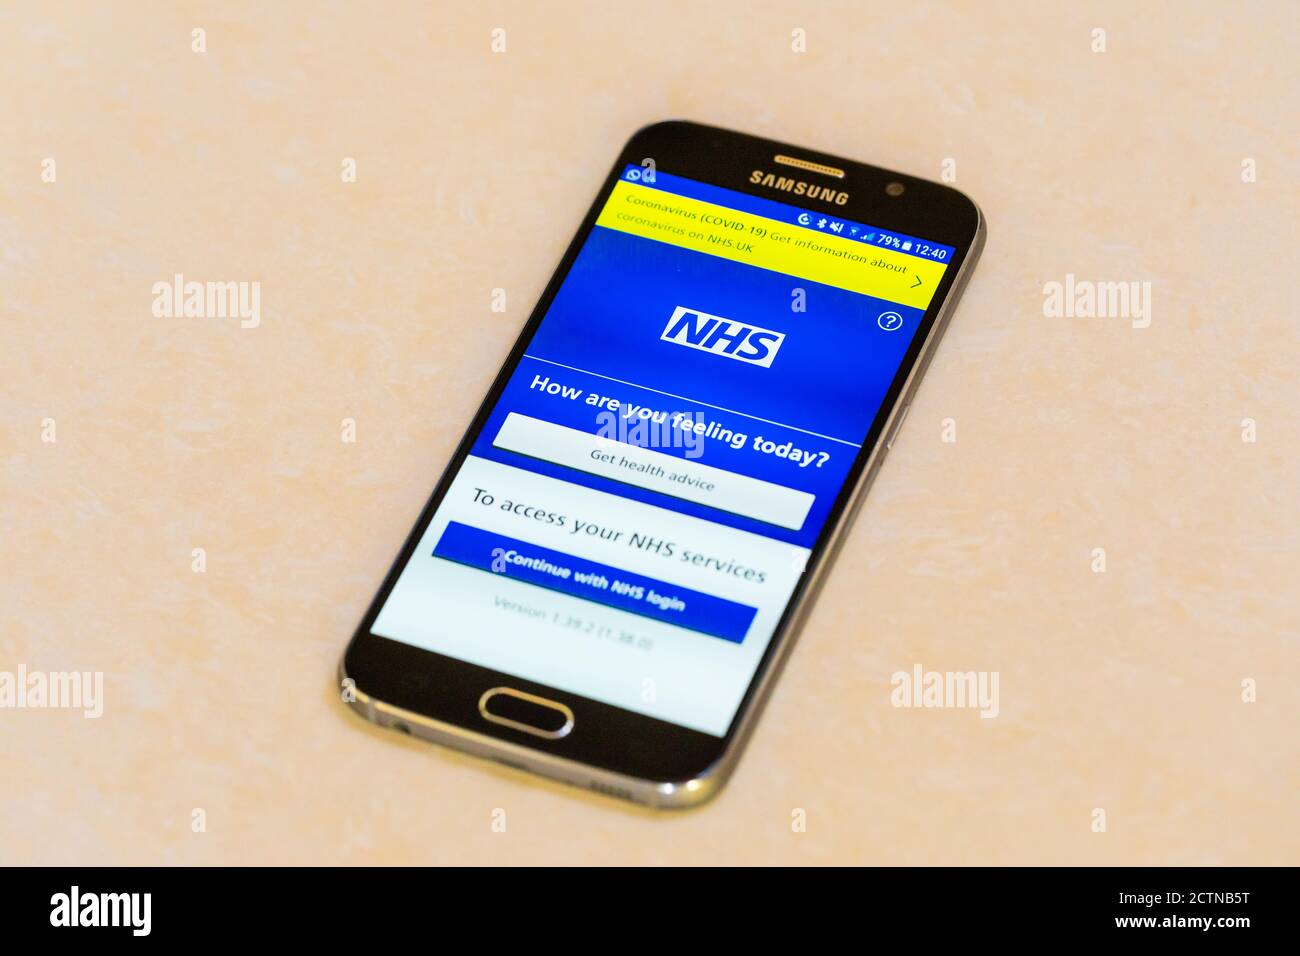 The Nhs Track And Trace App Home Screen Seen On The Screen Of A Samsung Android Mobile Phone Stock Photo Alamy